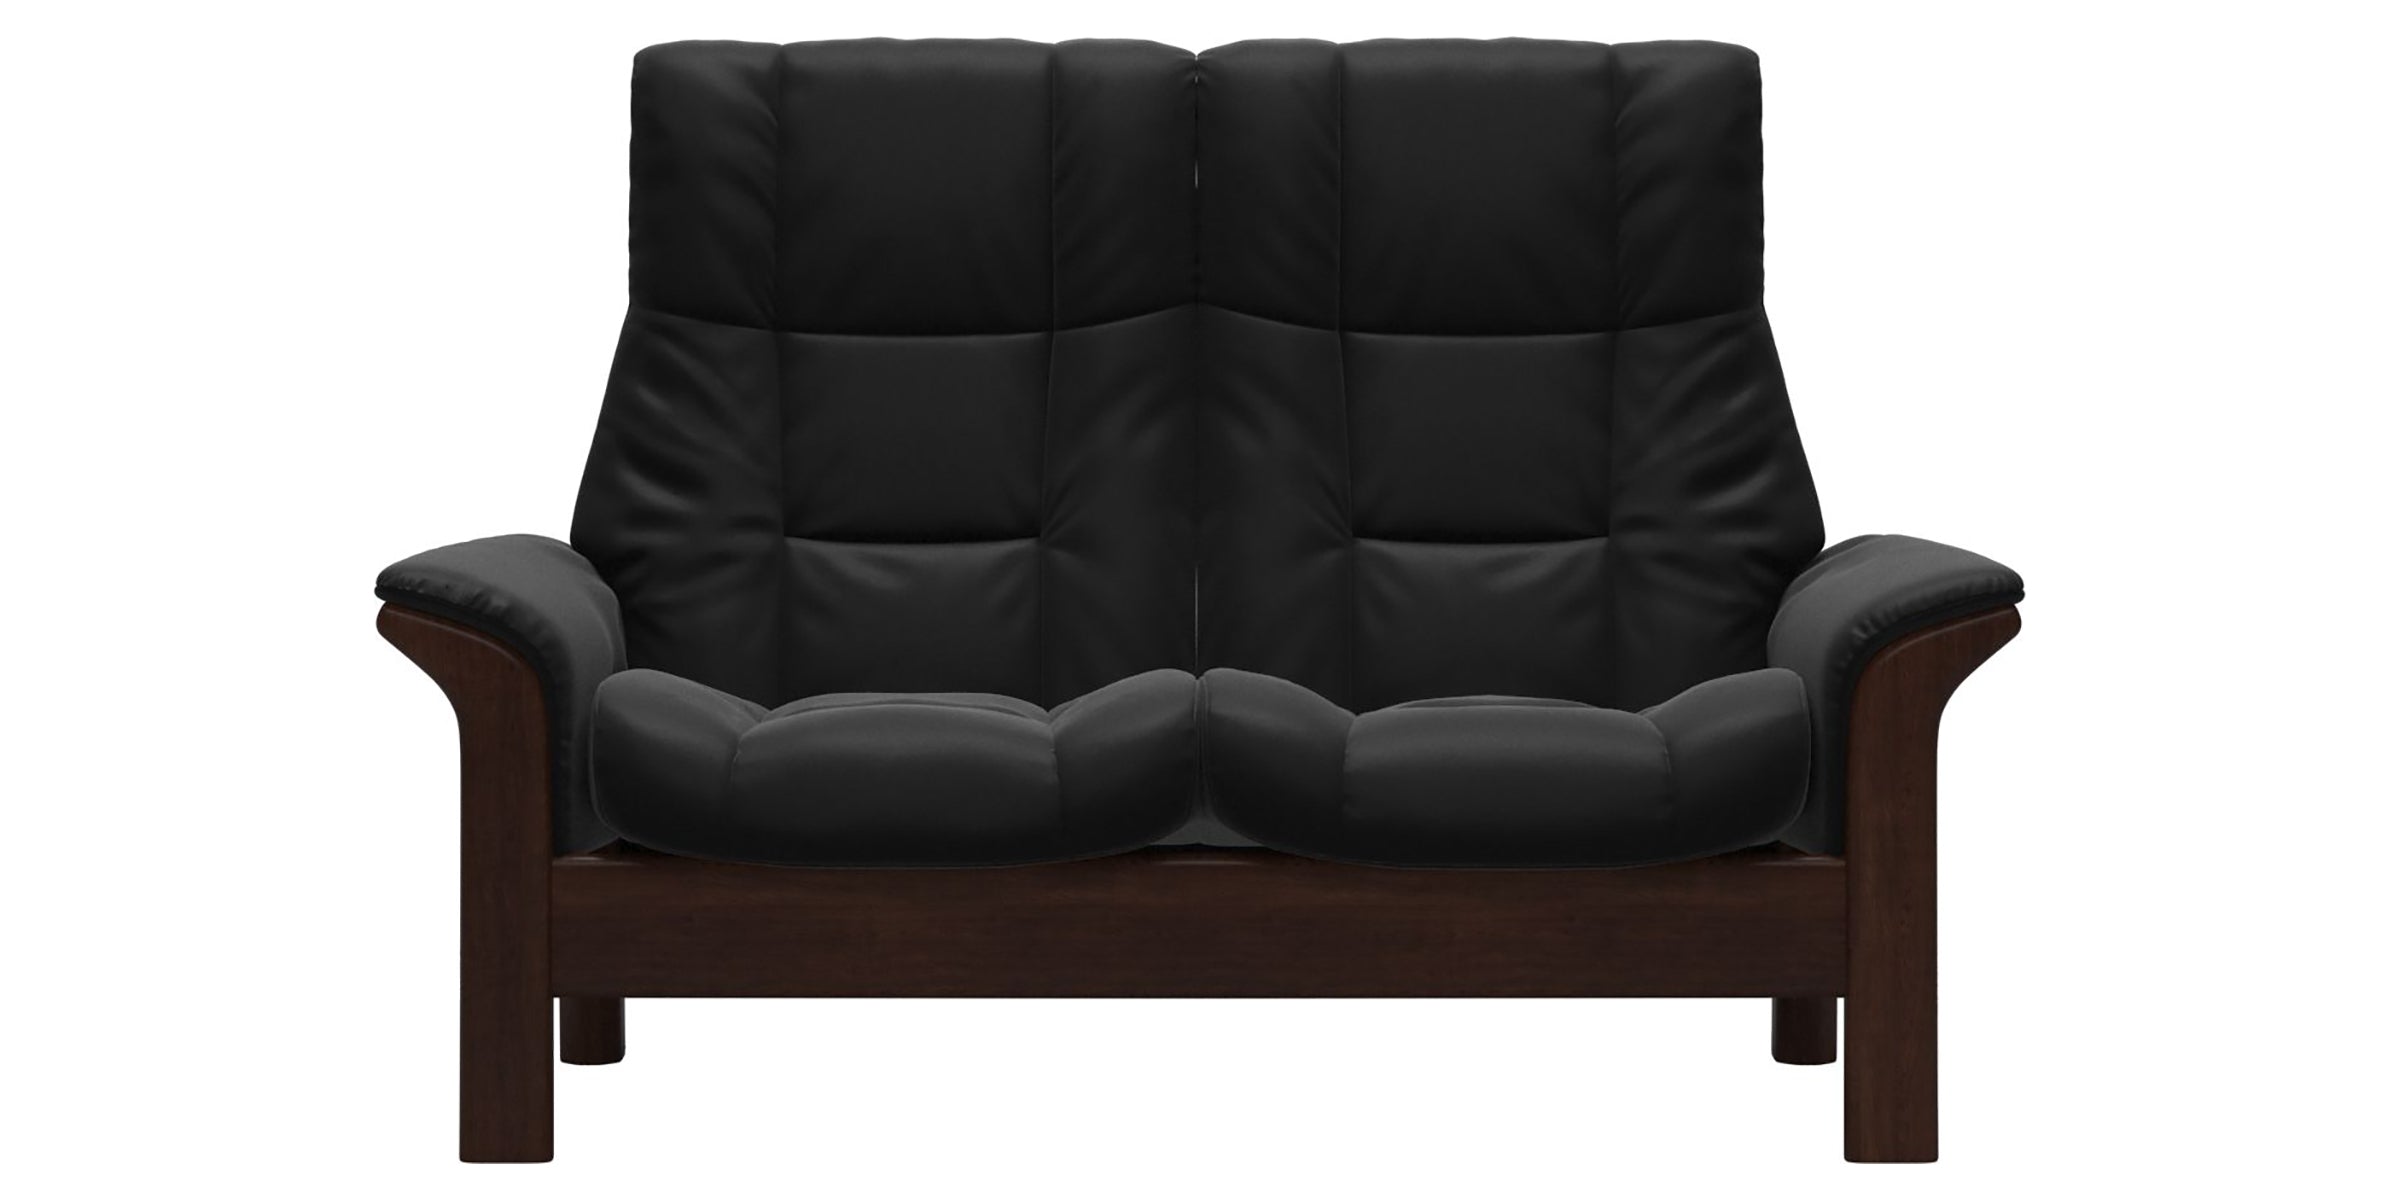 Paloma Leather Black and Brown Base | Stressless Windsor 2-Seater High Back Sofa | Valley Ridge Furniture